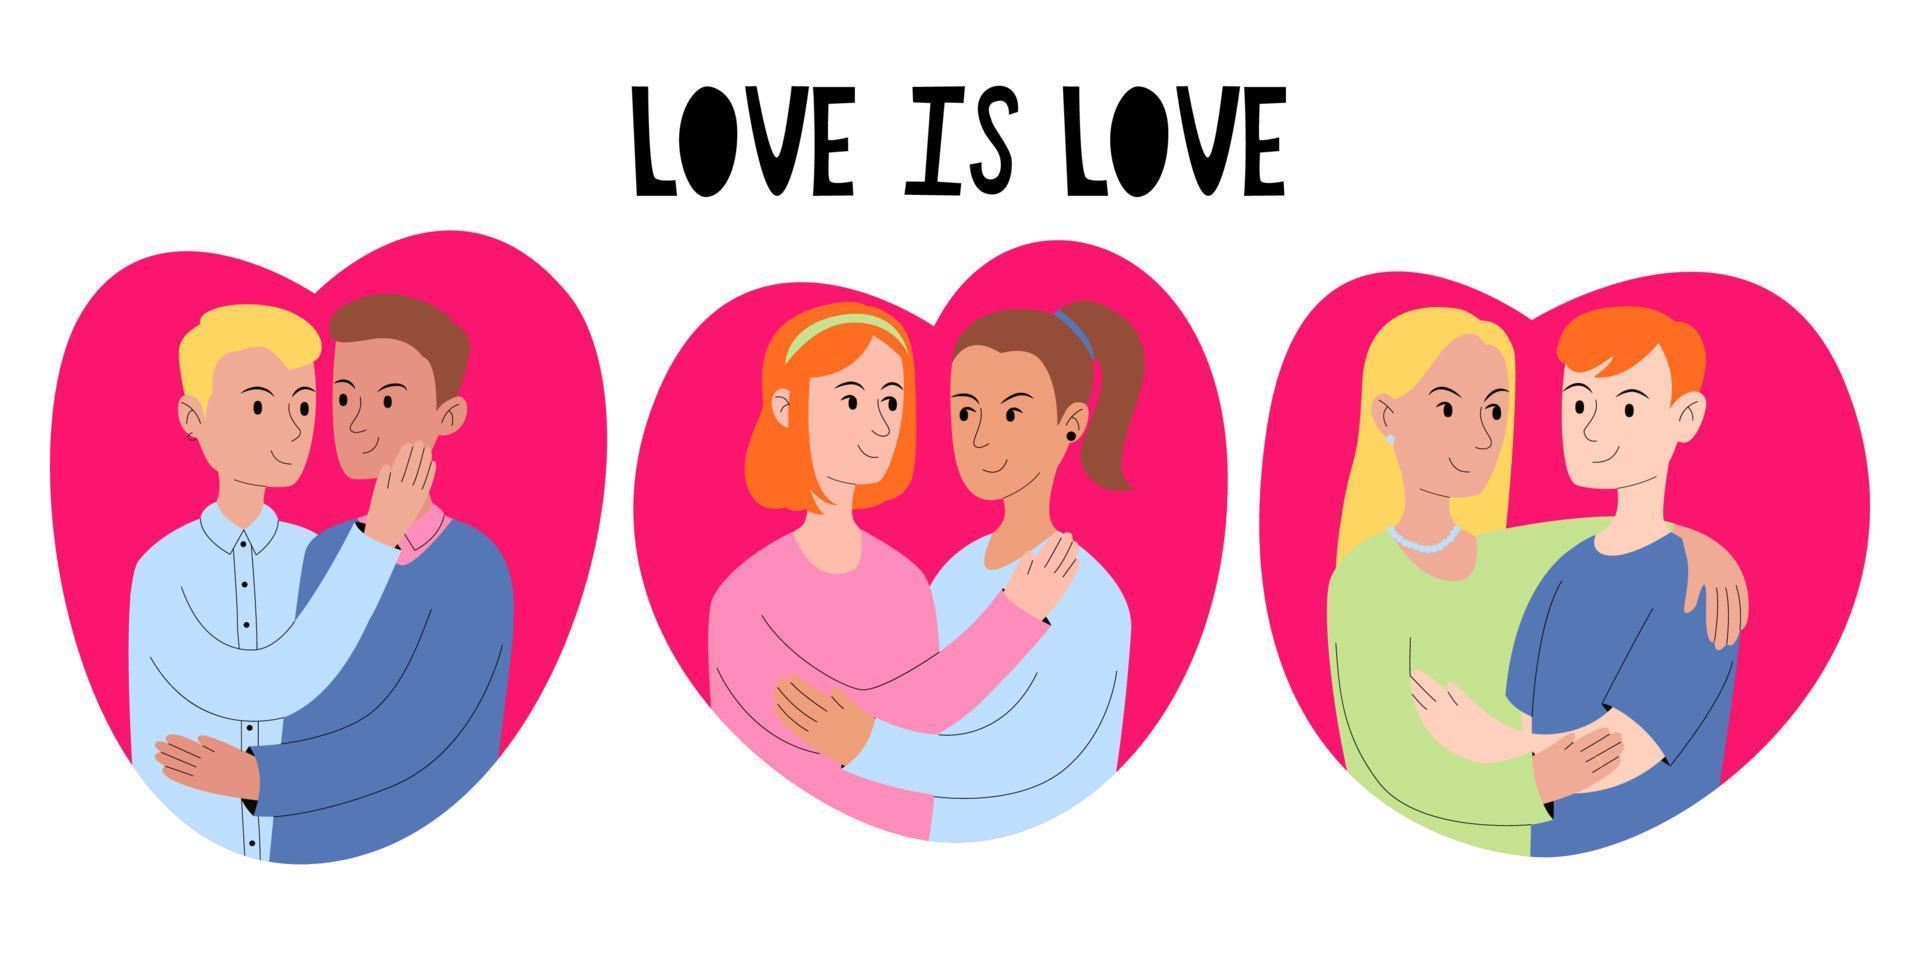 Homosexual and heterosexual couples set. Variety of orientations. LGBTQ. Straight, Gay and Lesbian hug. Inclusion. Valentine's Day. Text LOVE IS LOVE. Vector illustration in flat style.